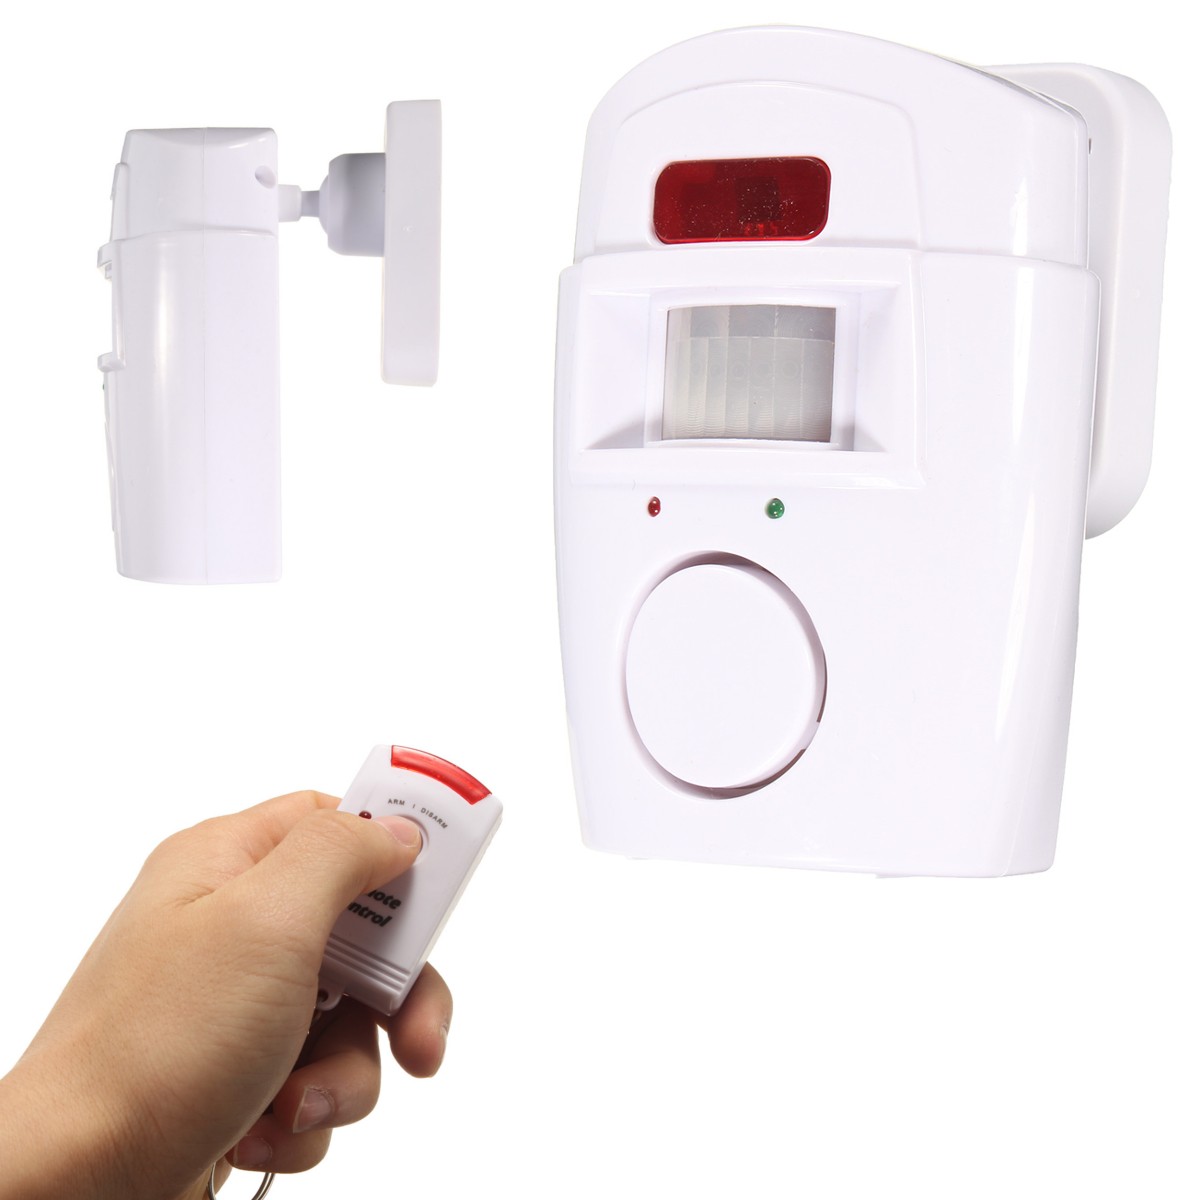 2-In-1-Motion-Wireless-Infrared-Security-Alarm-Chime-Alarm-Home-Detector-with-Remote-ControlHolder-1031195